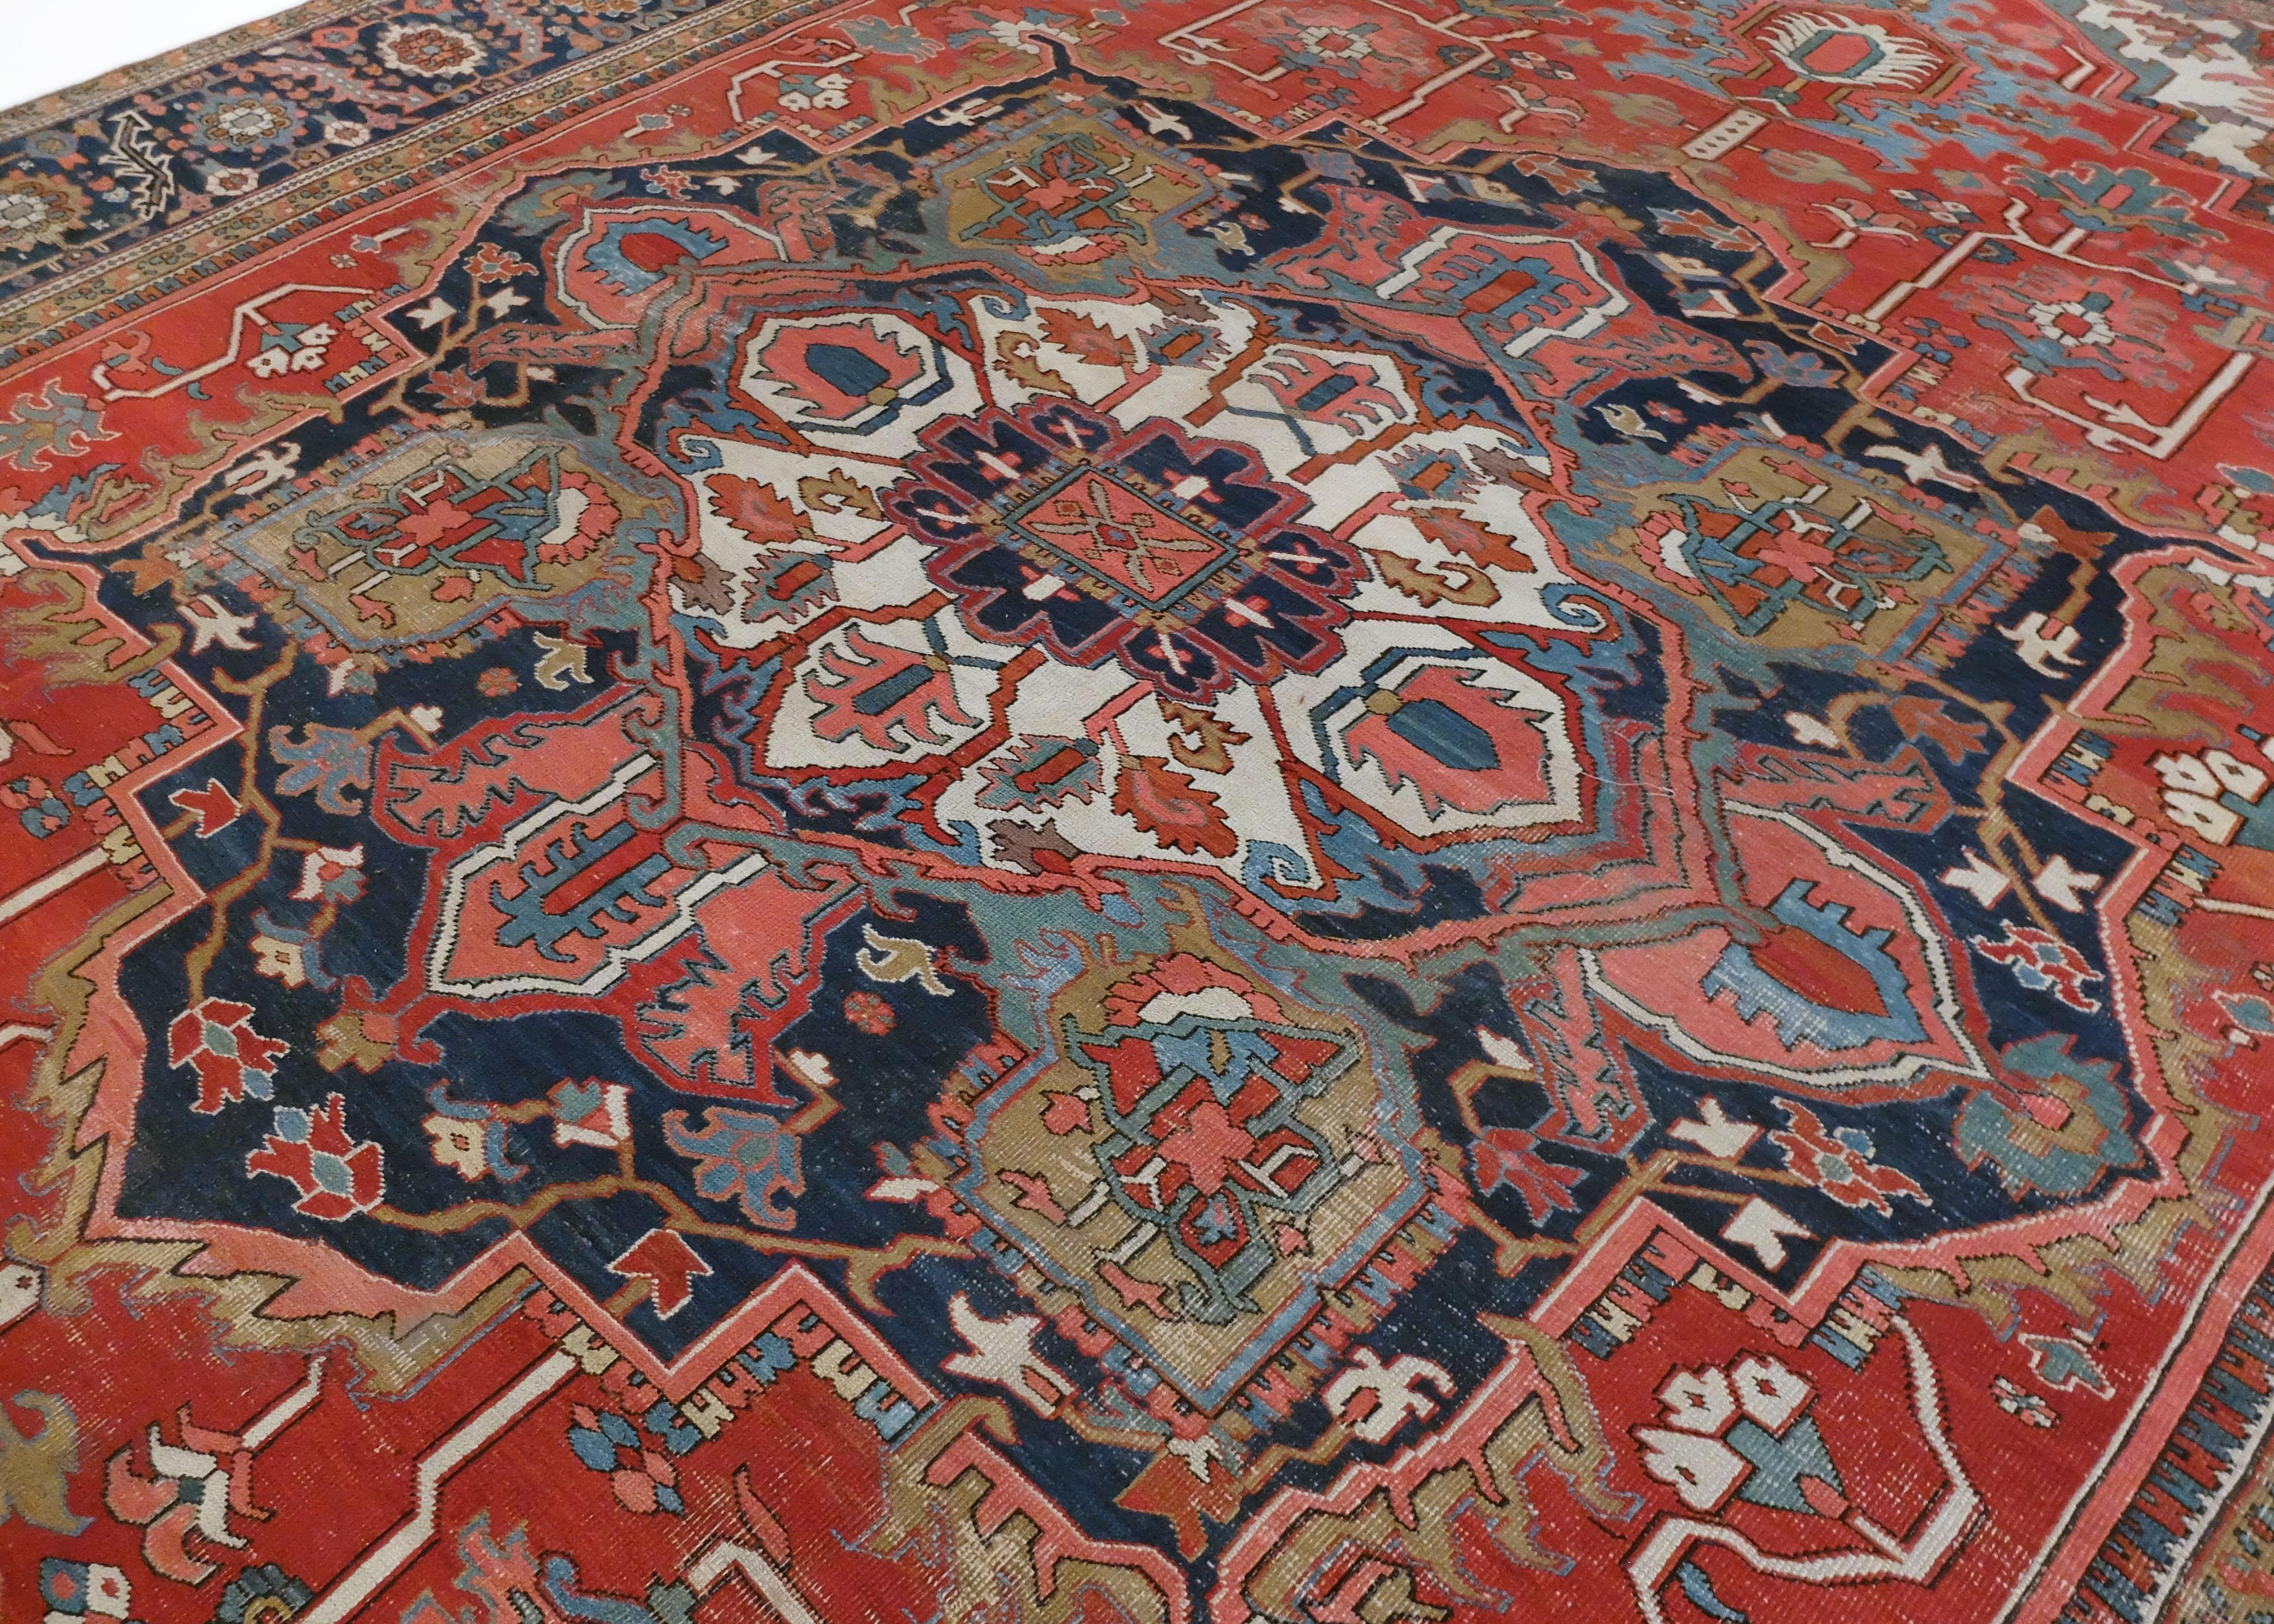 This is a Heriz rug made circa early 1900s. It has a large bold medallion in the middle surrounded by 4 bordering corner structures. The entire piece is highly stylized and consist of densely packed floral patterns. The colors are primarily reds,